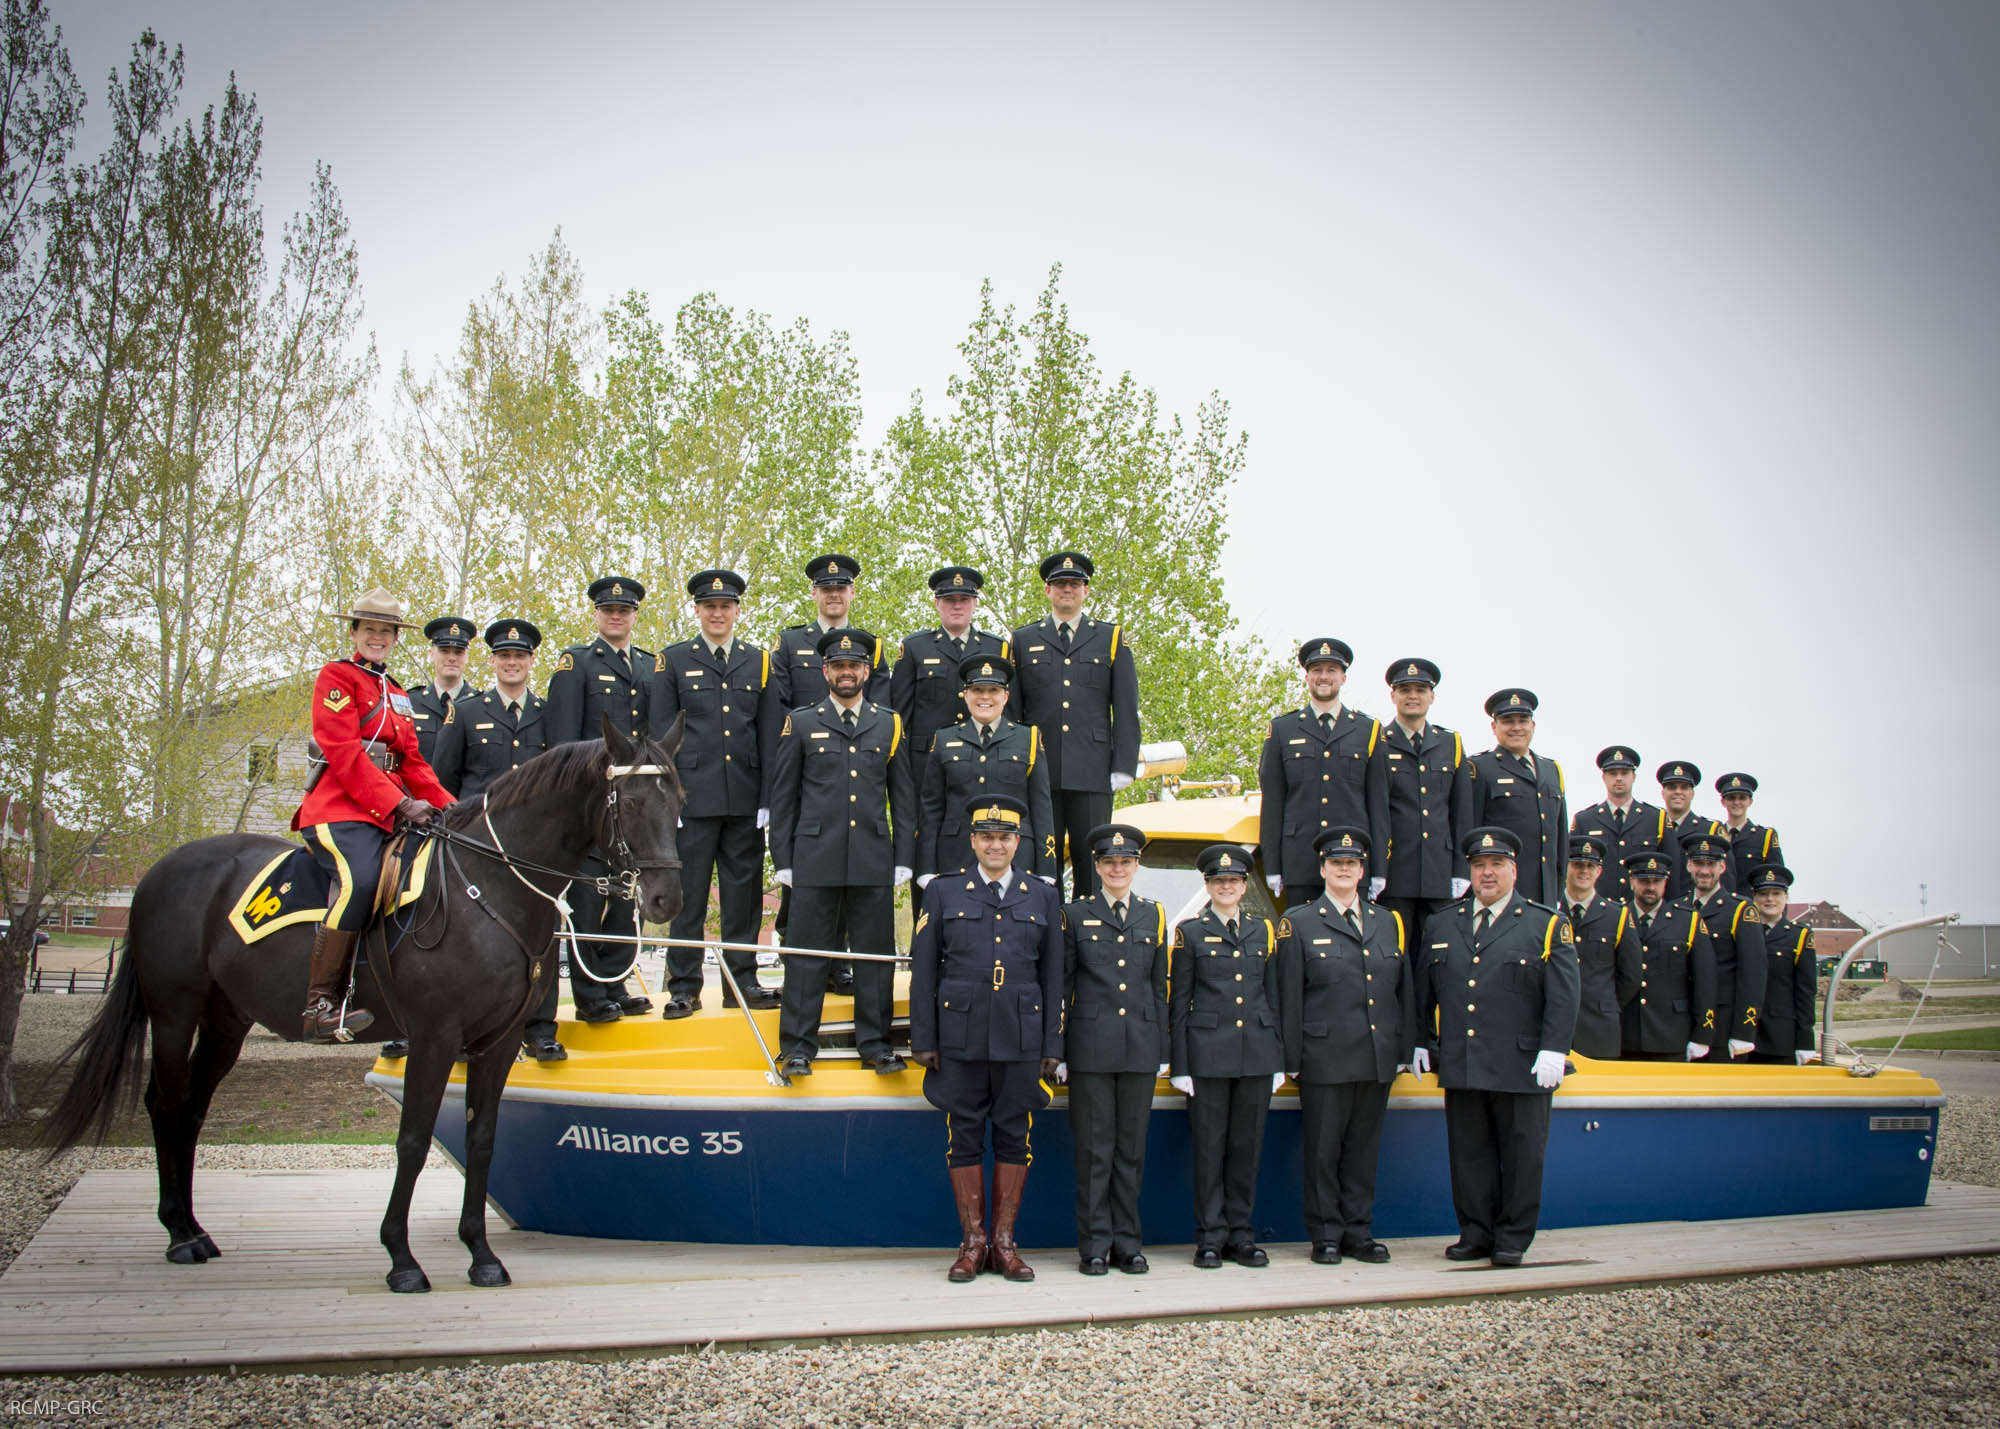 Congratulations to DFO¿s 22 new fishery officers